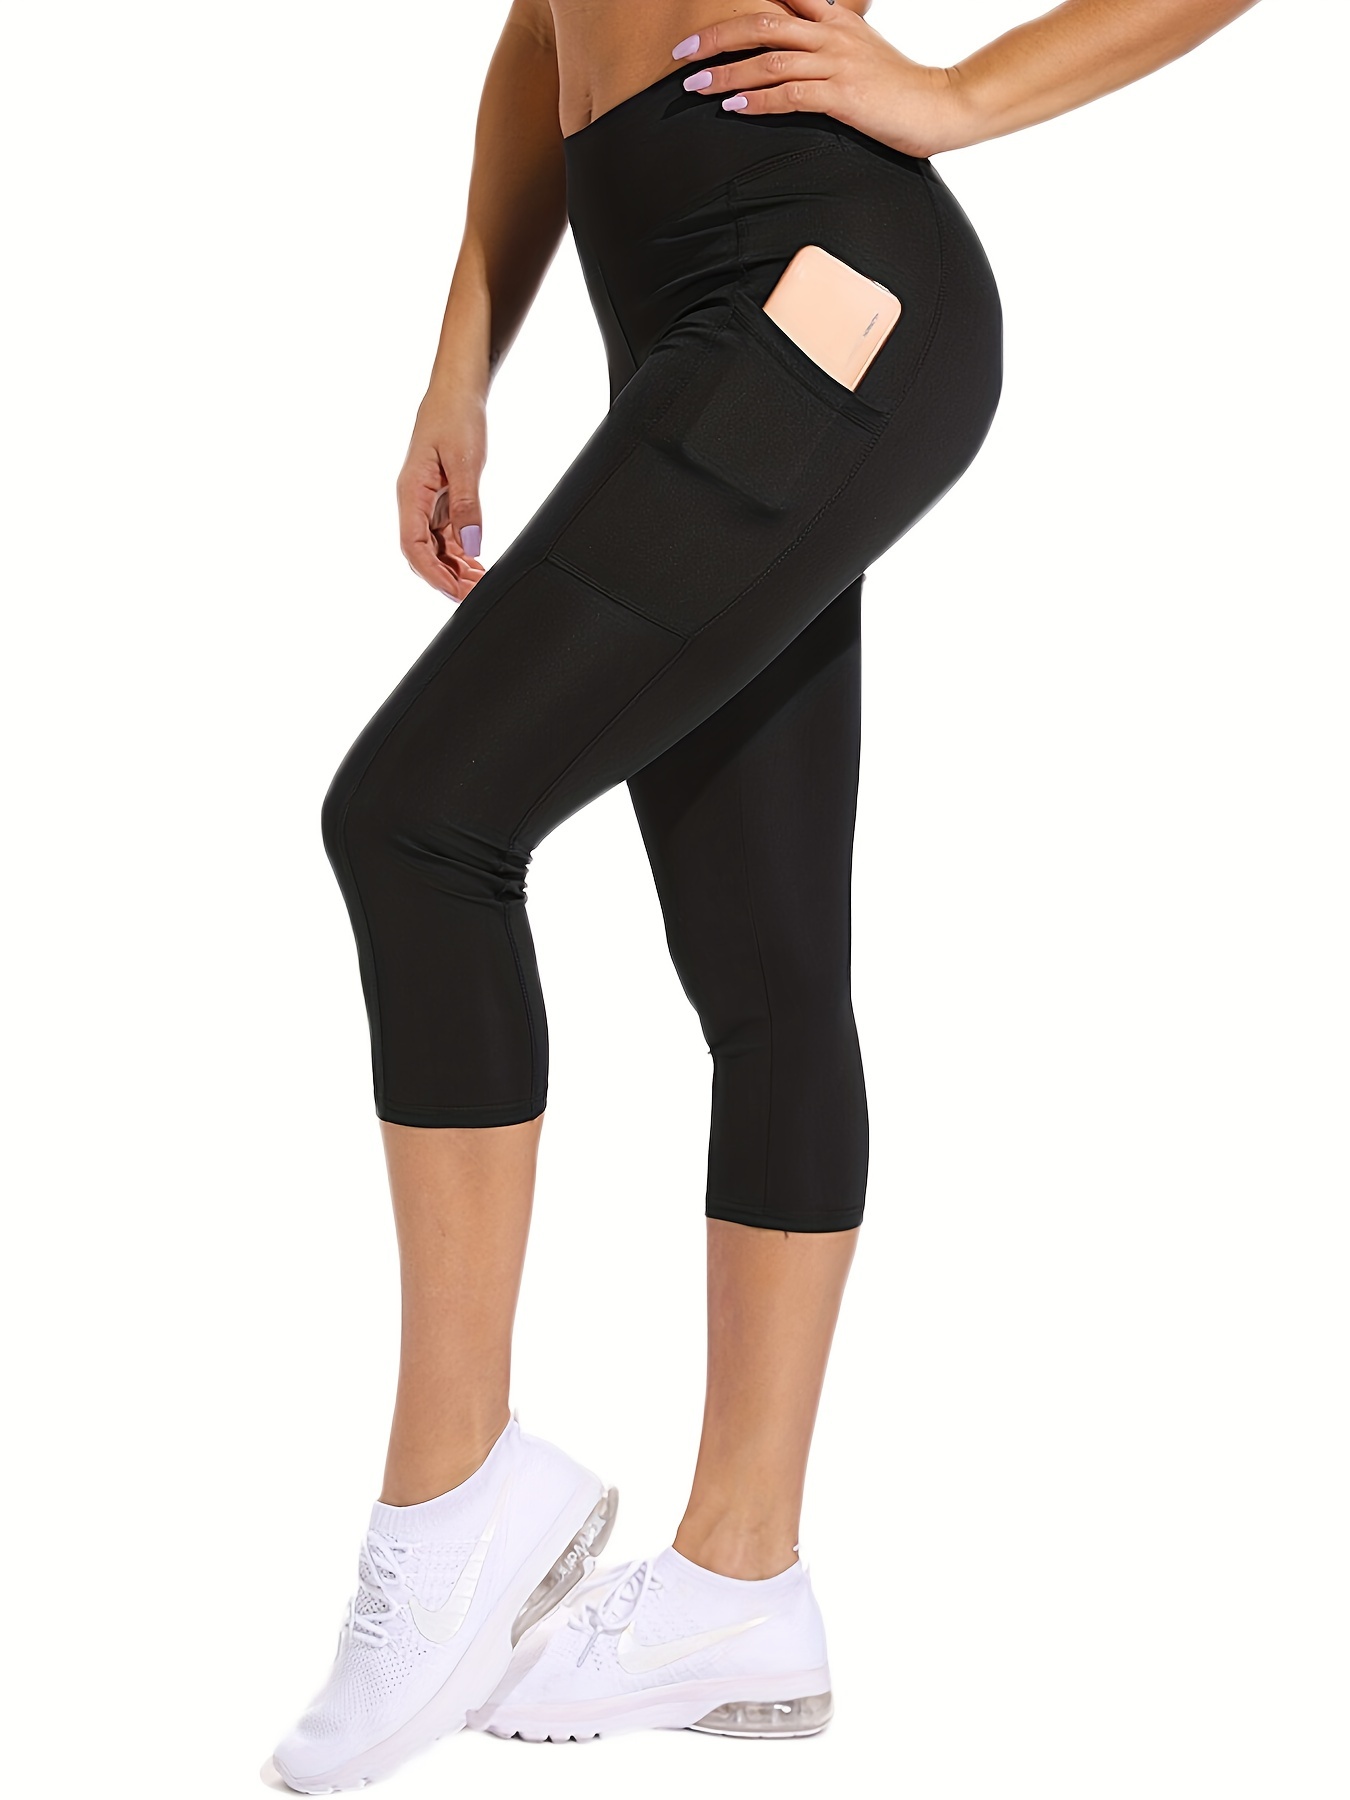 Quick-Drying Black Yoga Leggings with Hip-Lifting Design - Women's  Activewear for Sexy and Comfortable Workouts